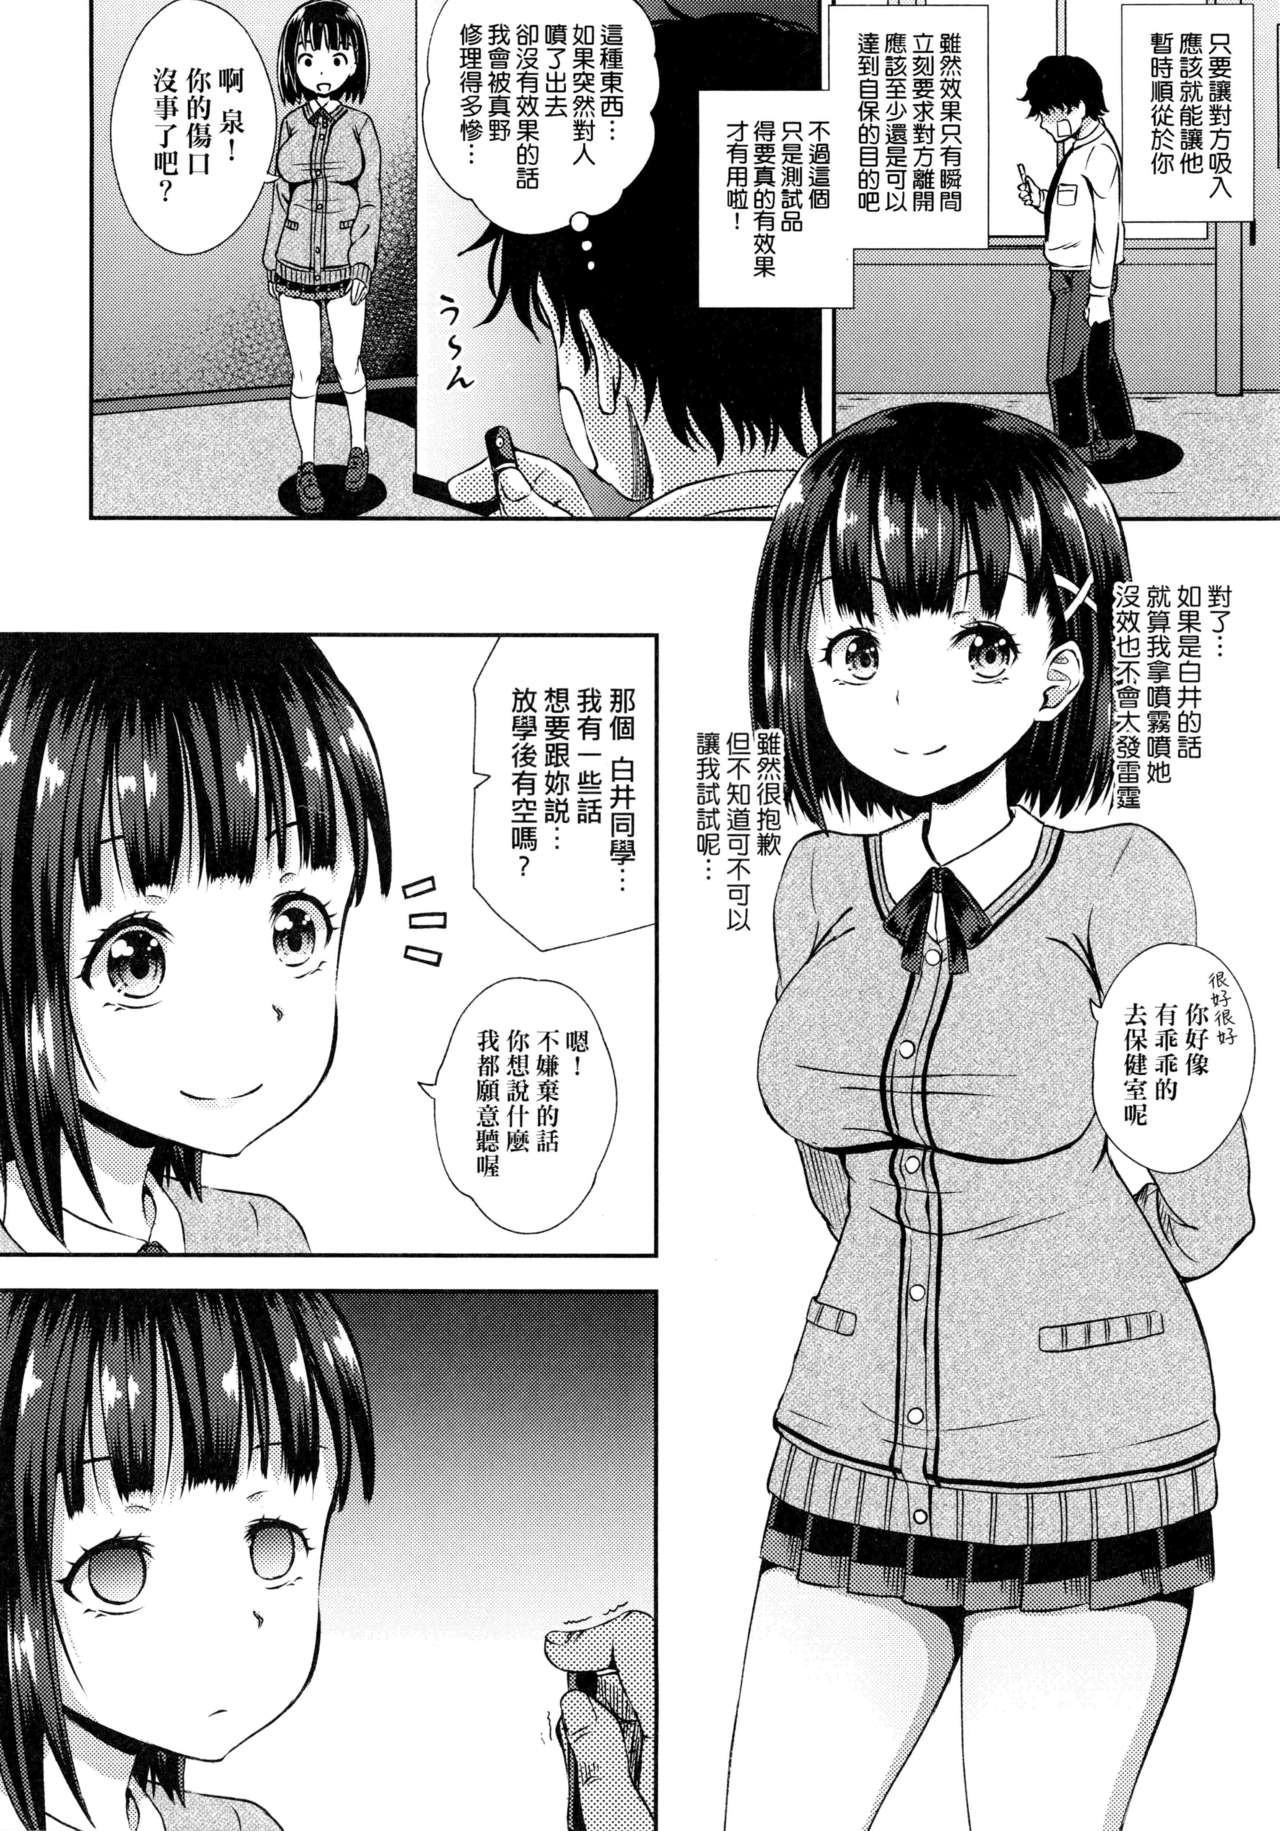 [Poncocchan] Saimin's Play | 強制催眠噴霧 [Chinese]  [Decensored] page 13 full